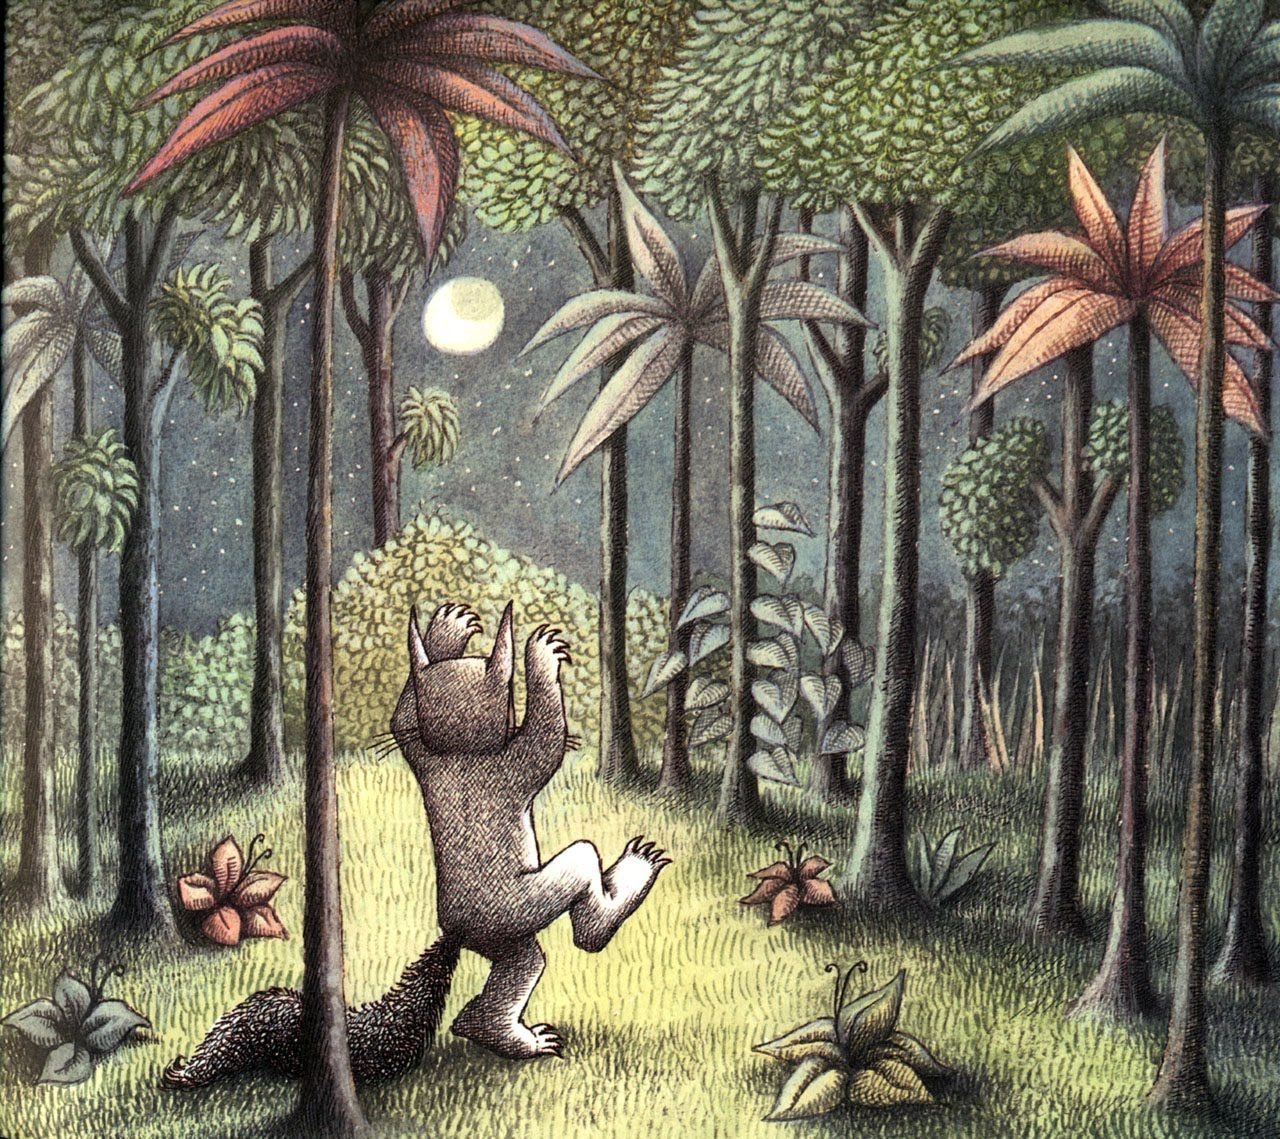 Where The Wild Things Are wallpaper, Cartoon, HQ Where The Wild Things Are pictureK Wallpaper 2019